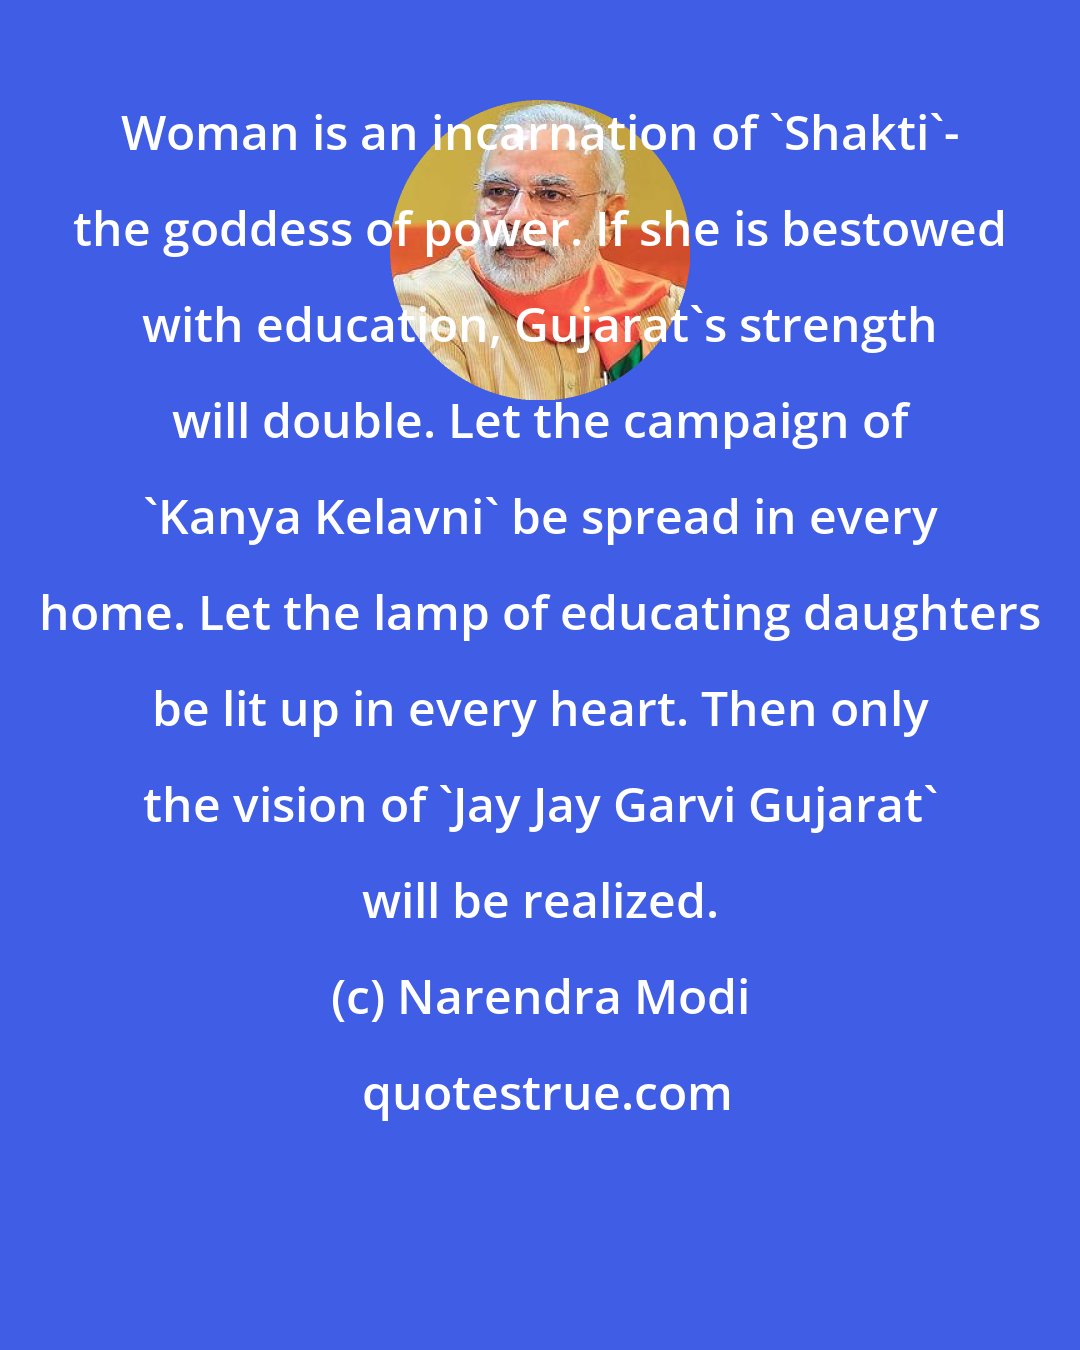 Narendra Modi: Woman is an incarnation of 'Shakti'- the goddess of power. If she is bestowed with education, Gujarat's strength will double. Let the campaign of 'Kanya Kelavni' be spread in every home. Let the lamp of educating daughters be lit up in every heart. Then only the vision of 'Jay Jay Garvi Gujarat' will be realized.